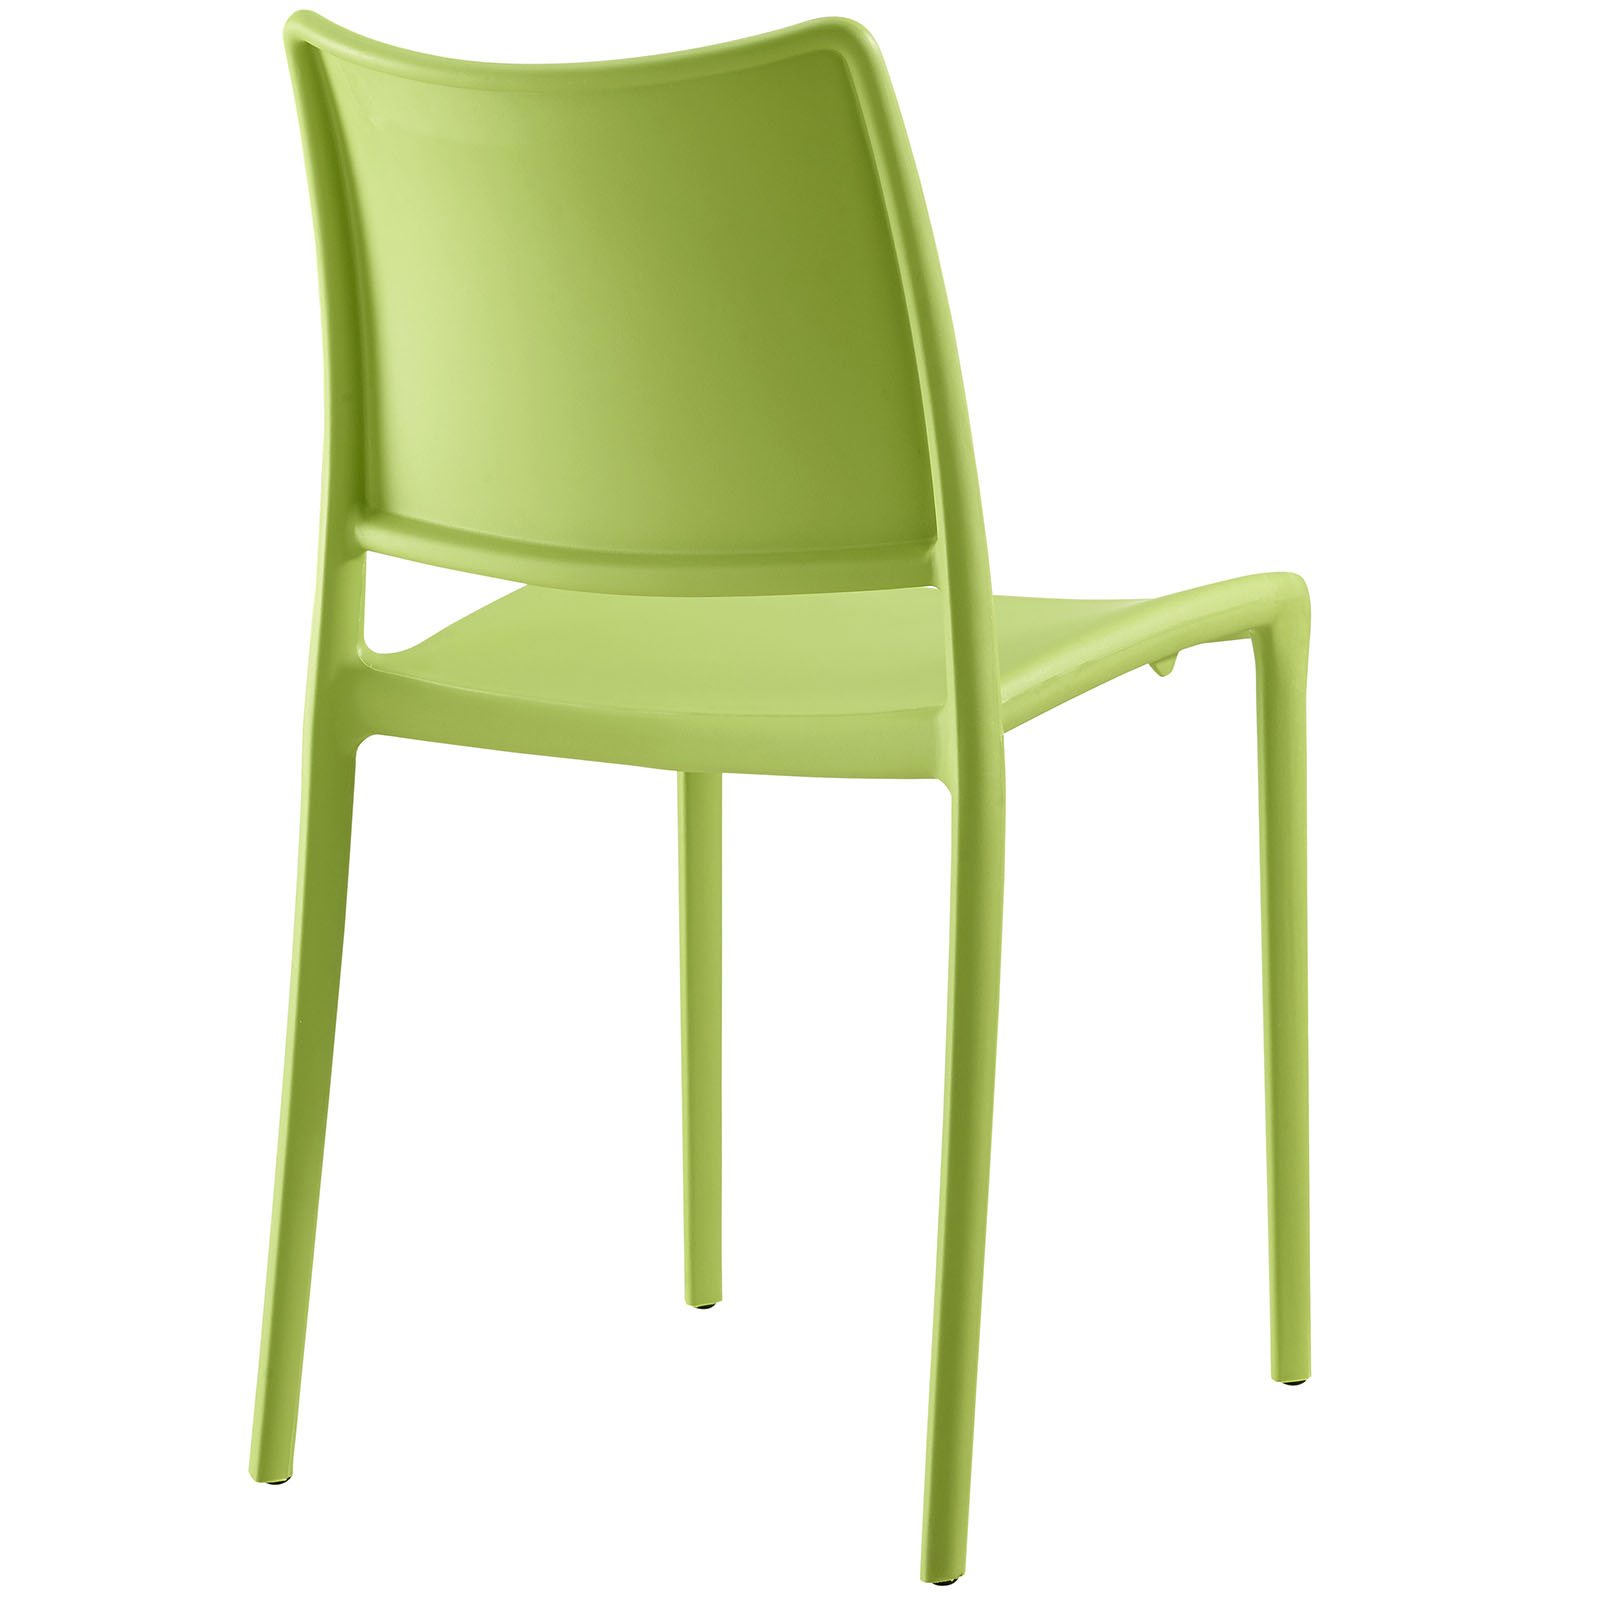 Modern Contemporary Urban Design Outdoor Kitchen Room Dining Chair ( Set of 2), Green, Plastic - image 4 of 4